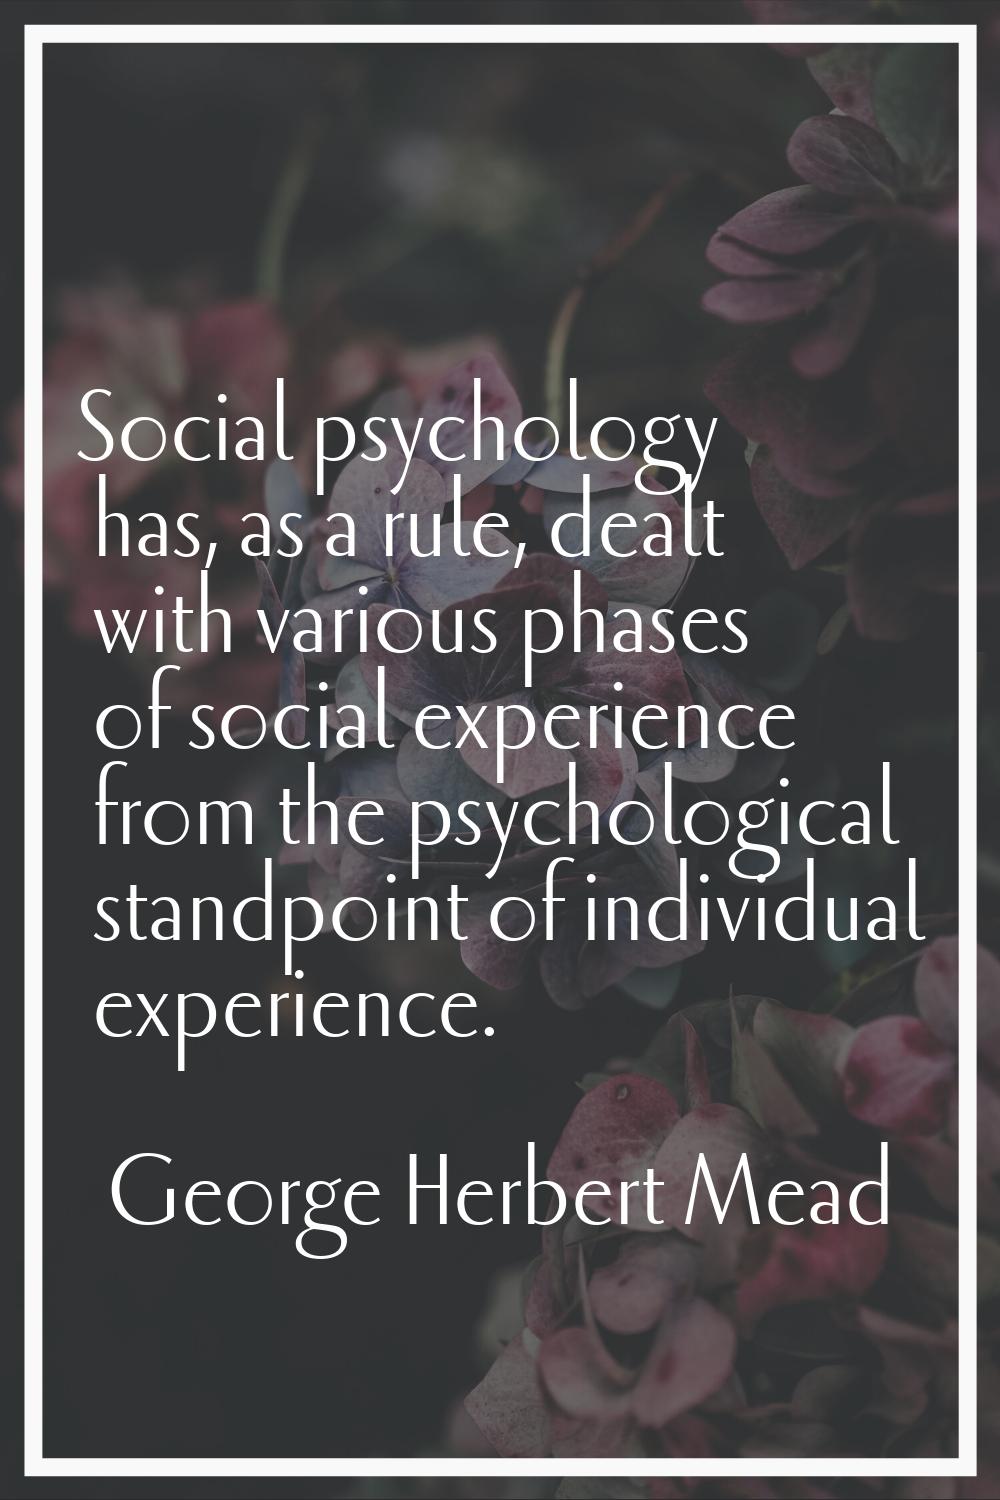 Social psychology has, as a rule, dealt with various phases of social experience from the psycholog